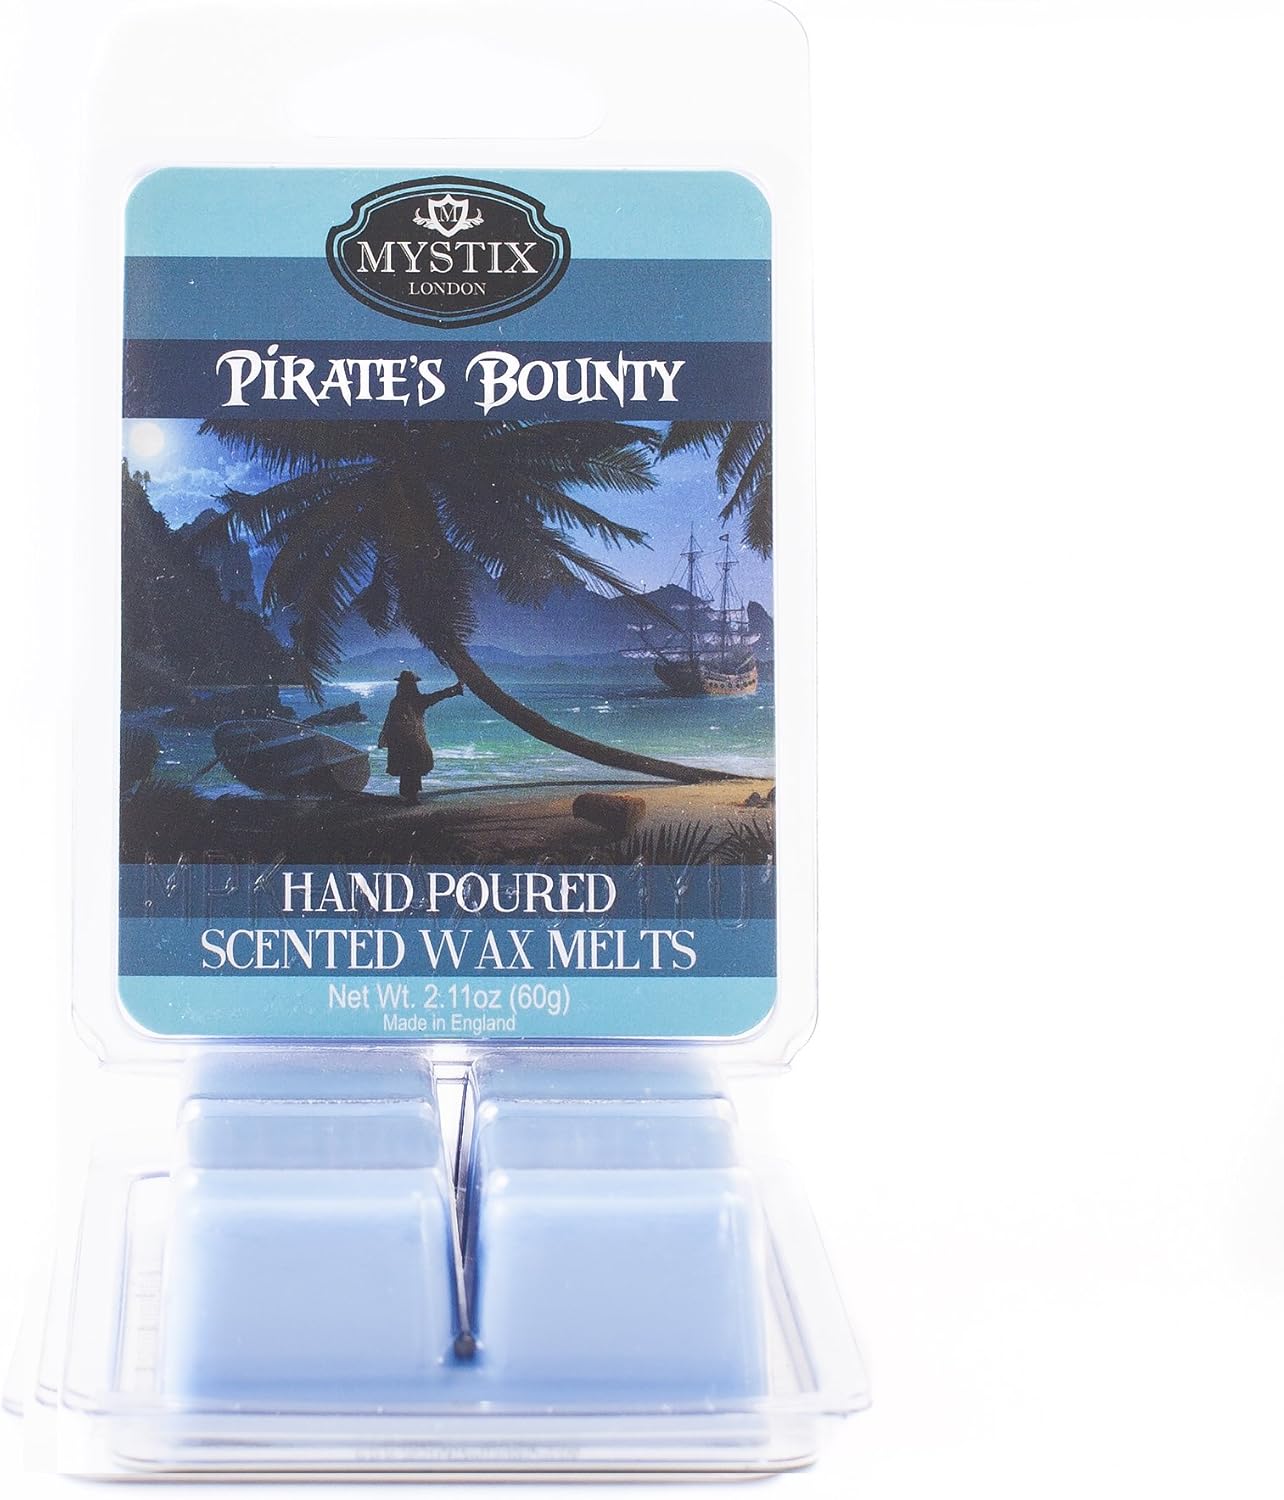 Mystix London | Pirate’s Bounty - Wax Melts Clamshell 60g (6 cubes) | 100% Natural Soya Wax | Best Aroma for Home, Kitchen, Living Room and Bathroom | Perfect as a Gift | Handmade in UK